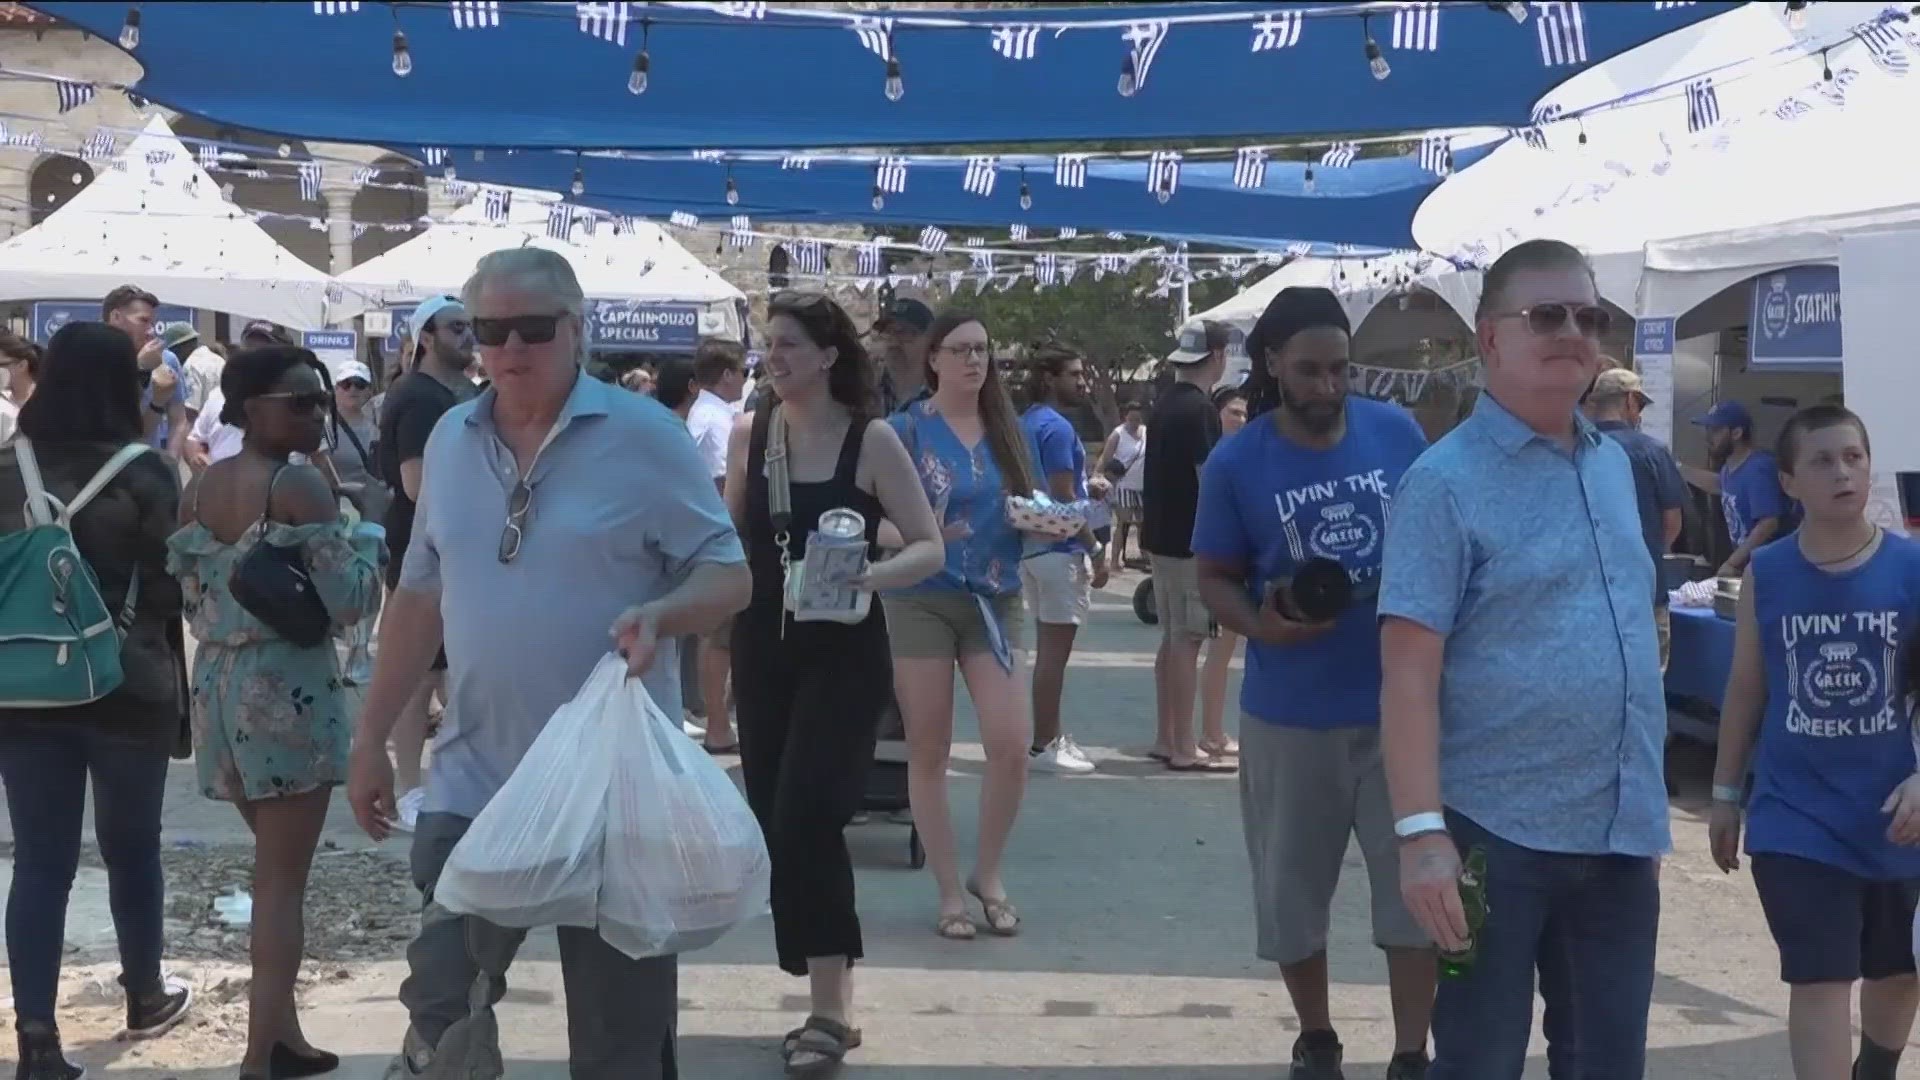 Sunday was the last day to enjoy some traditional Greek food and music at the fourth annual Austin Greek Festival. KVUE was there to see what it's all about.